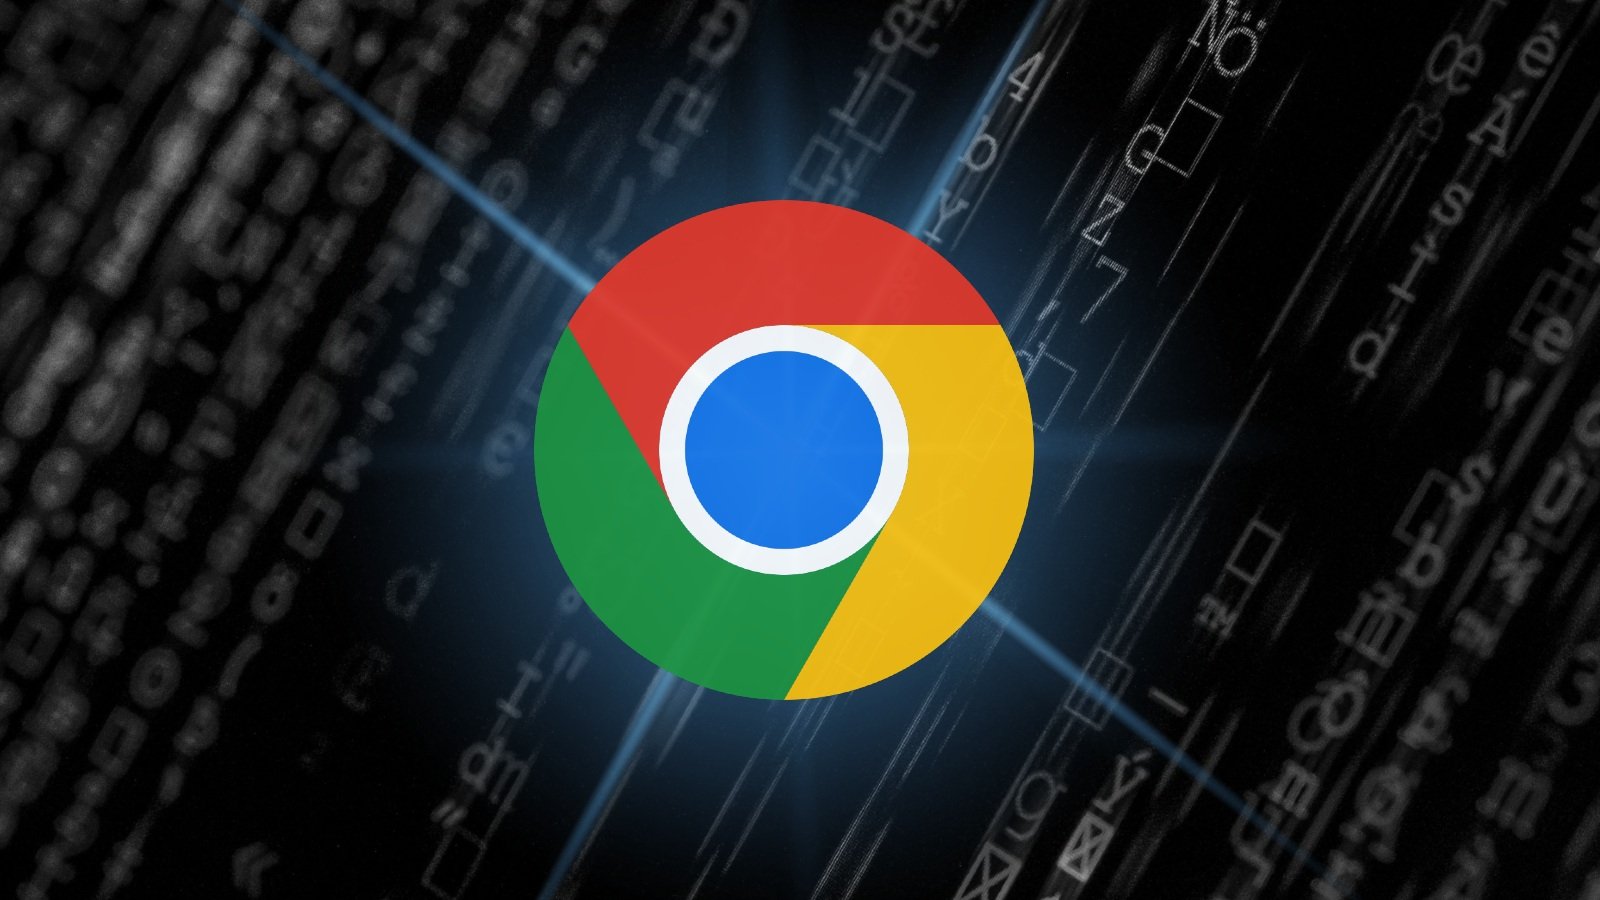 Google rolls out Privacy Sandbox to use Chrome browsing history for ads